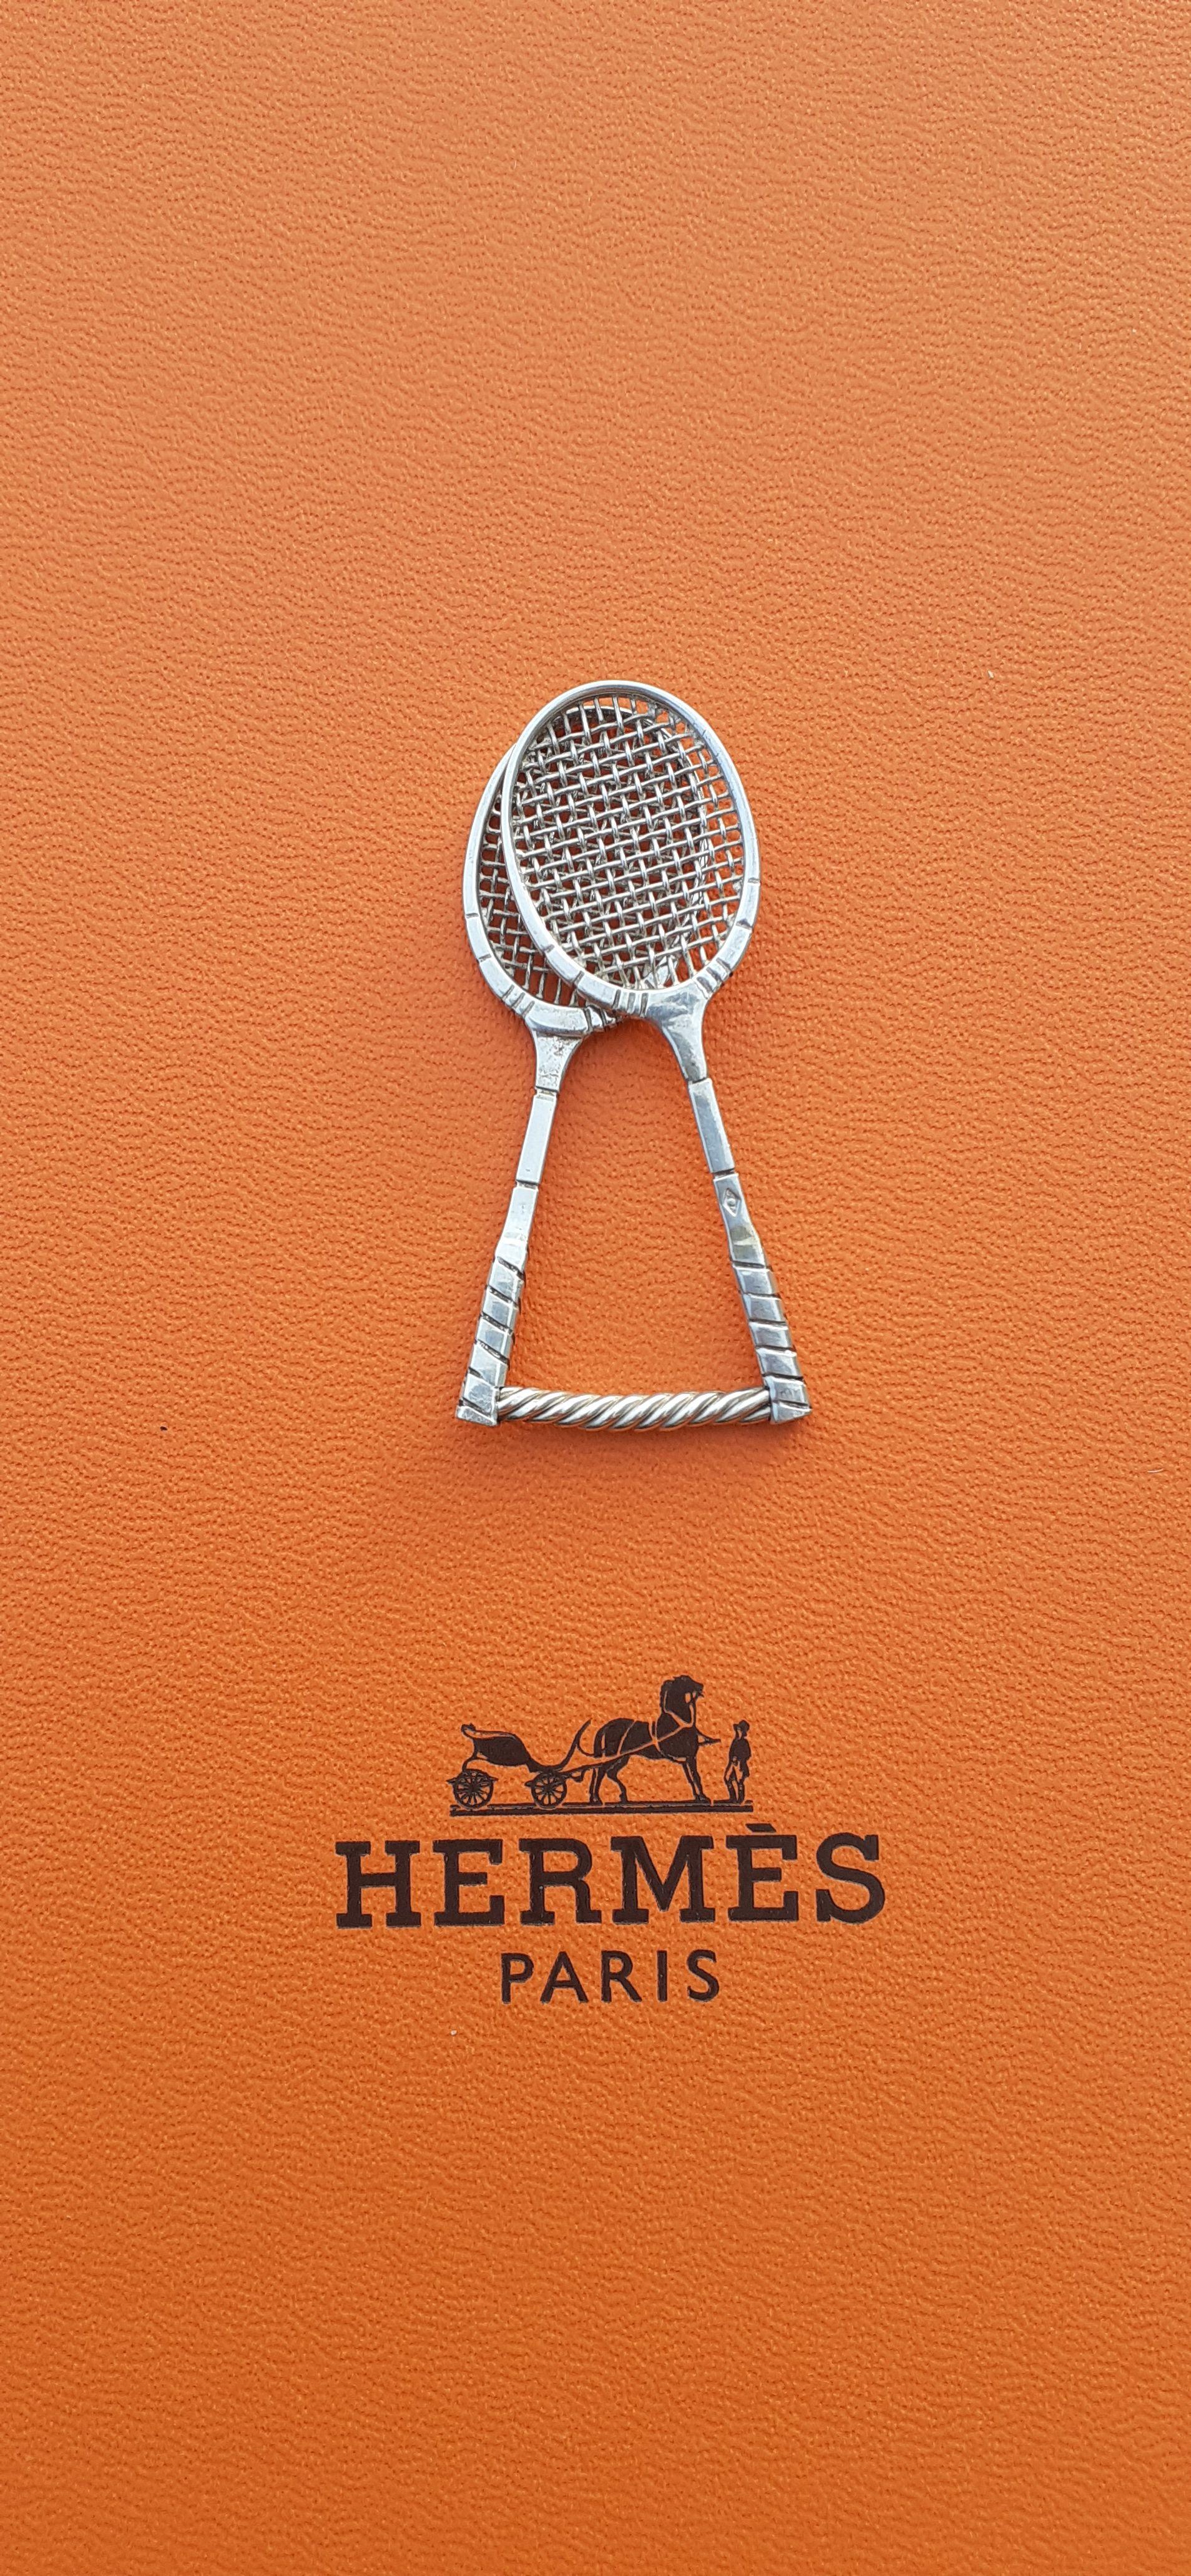 Rare and Lovely Authentic Hermès Tie Clip

Shaped like 2 tennis rackets

Made for IPTA (Internationa Platform Tennis Association)

Probably a vintage item considering the box

Made of Silver (crab hallmark)

